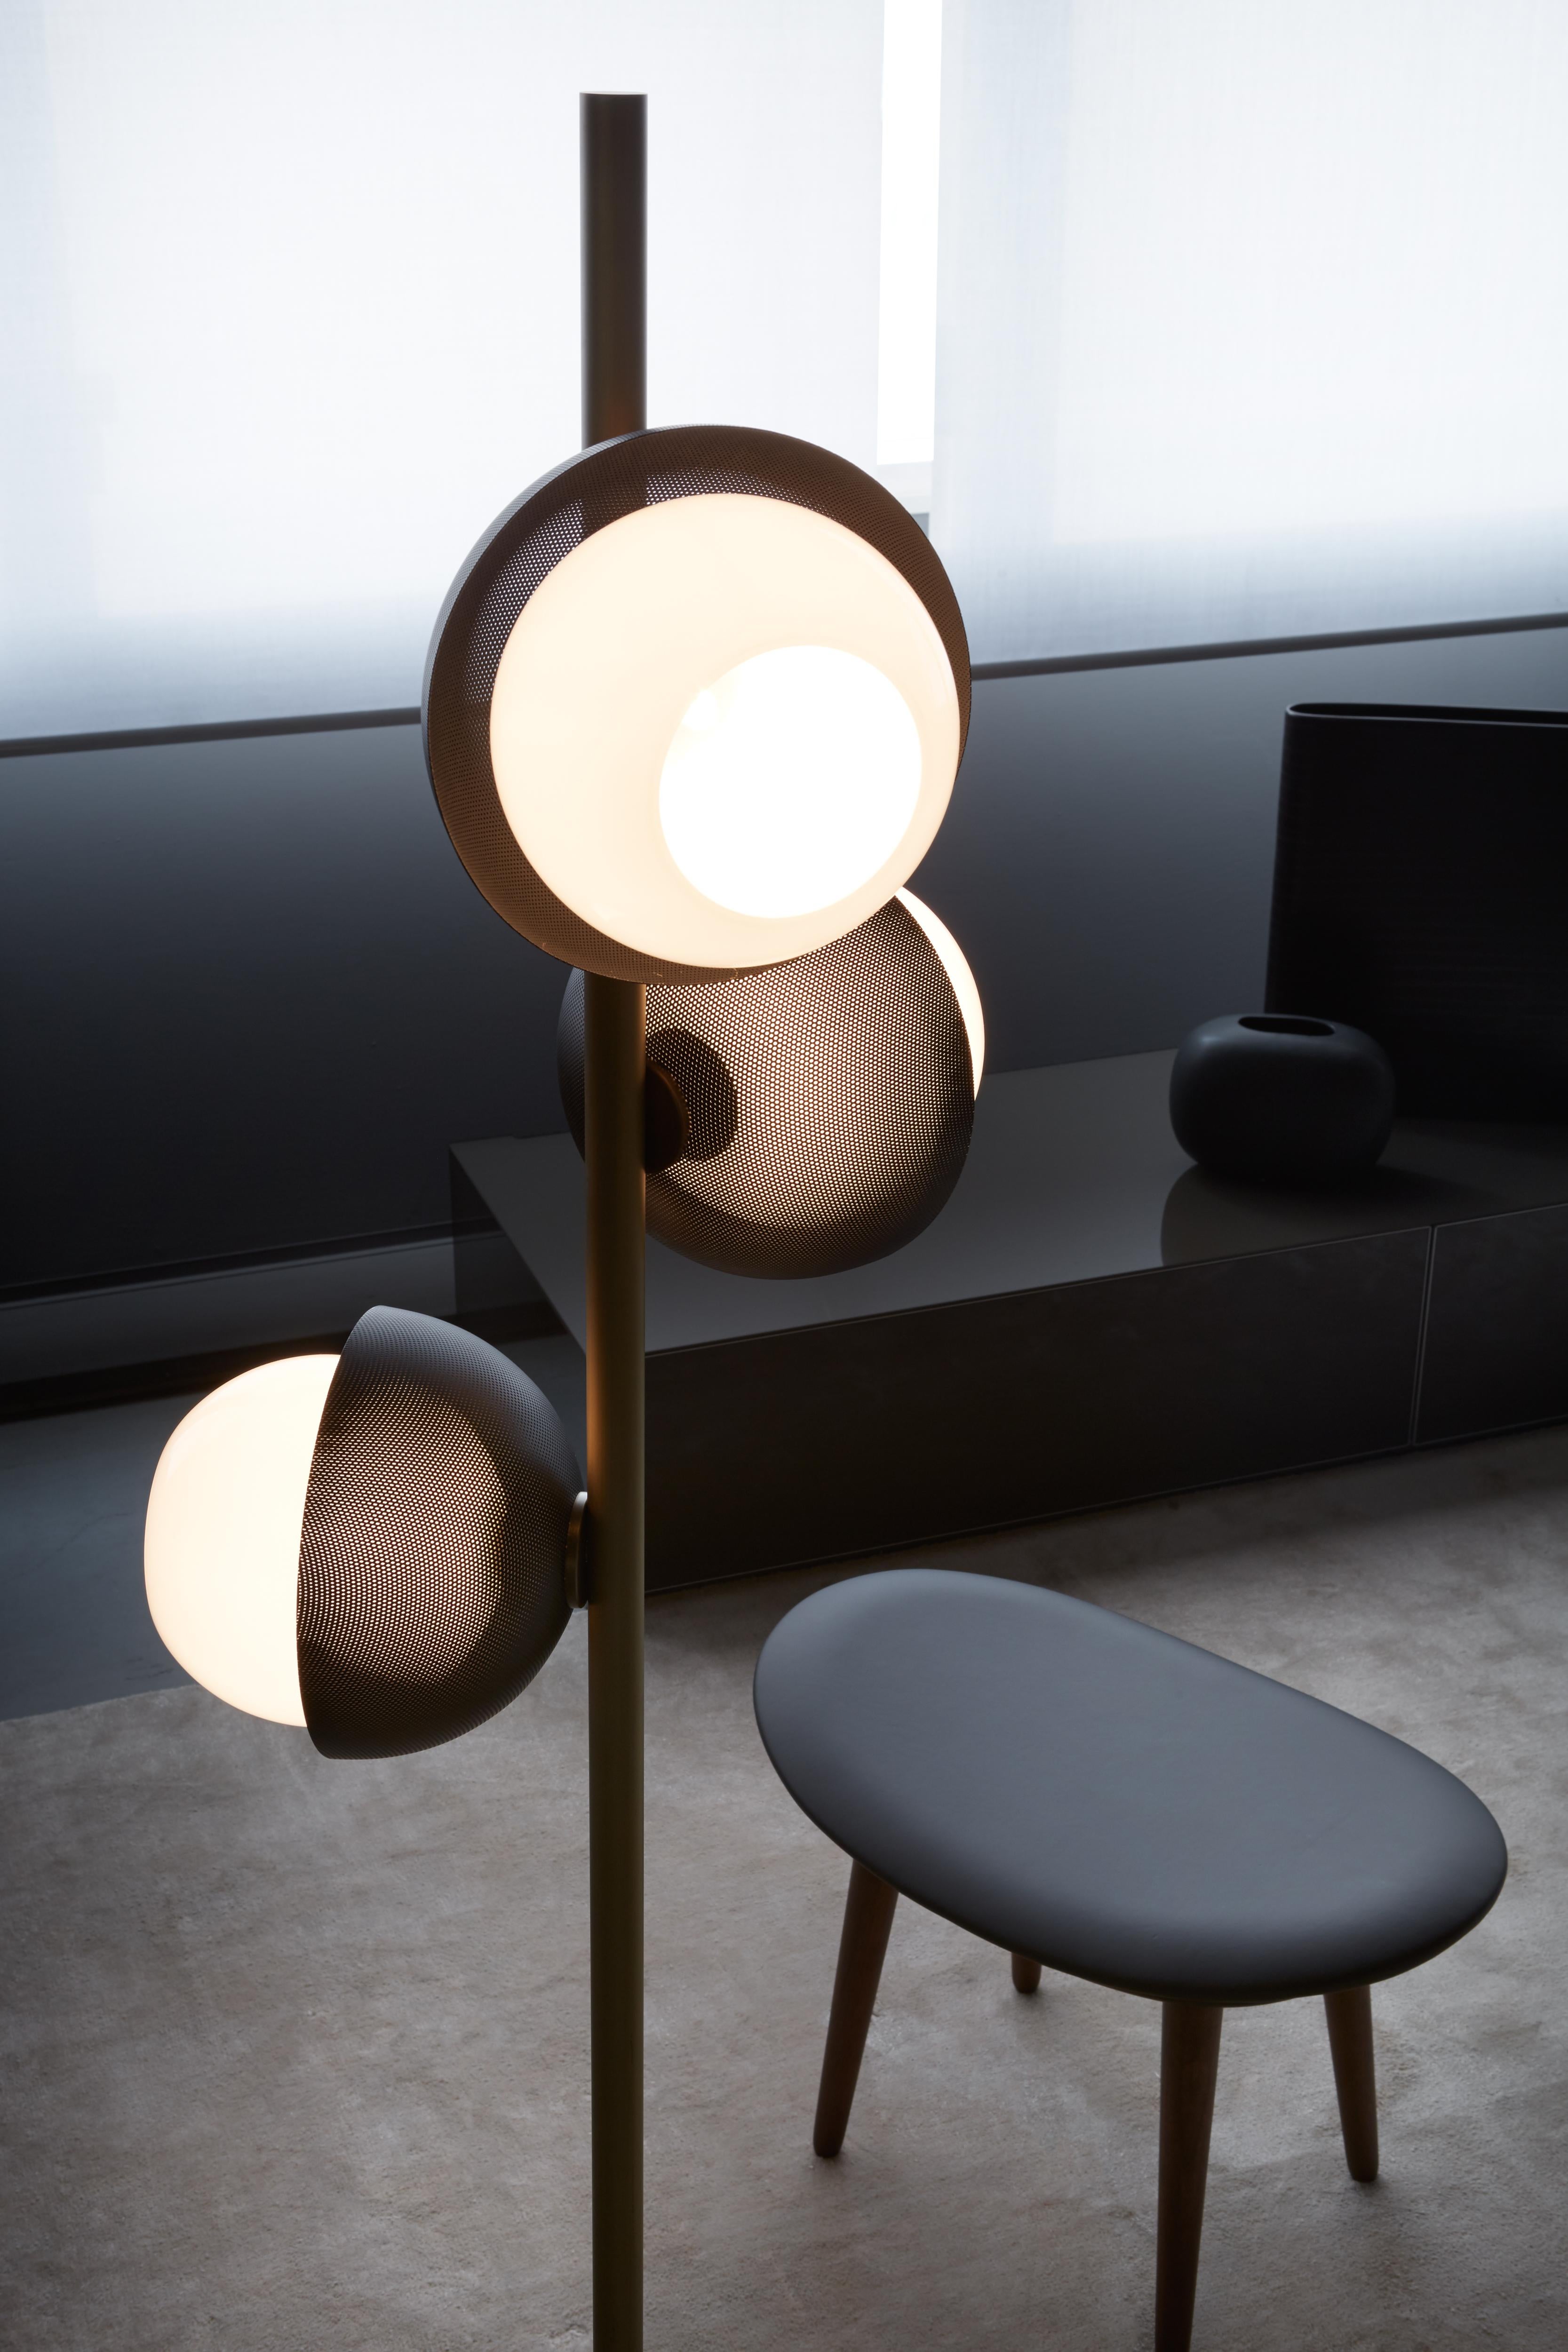 Floor lamp with diffused light. Light burnished brass structure with matte gold or matte black perforated metal lampshade. White Murano blown glass diffuser.
Specifications:
Function: Floor
Location: Interior
Light emission: Diffused